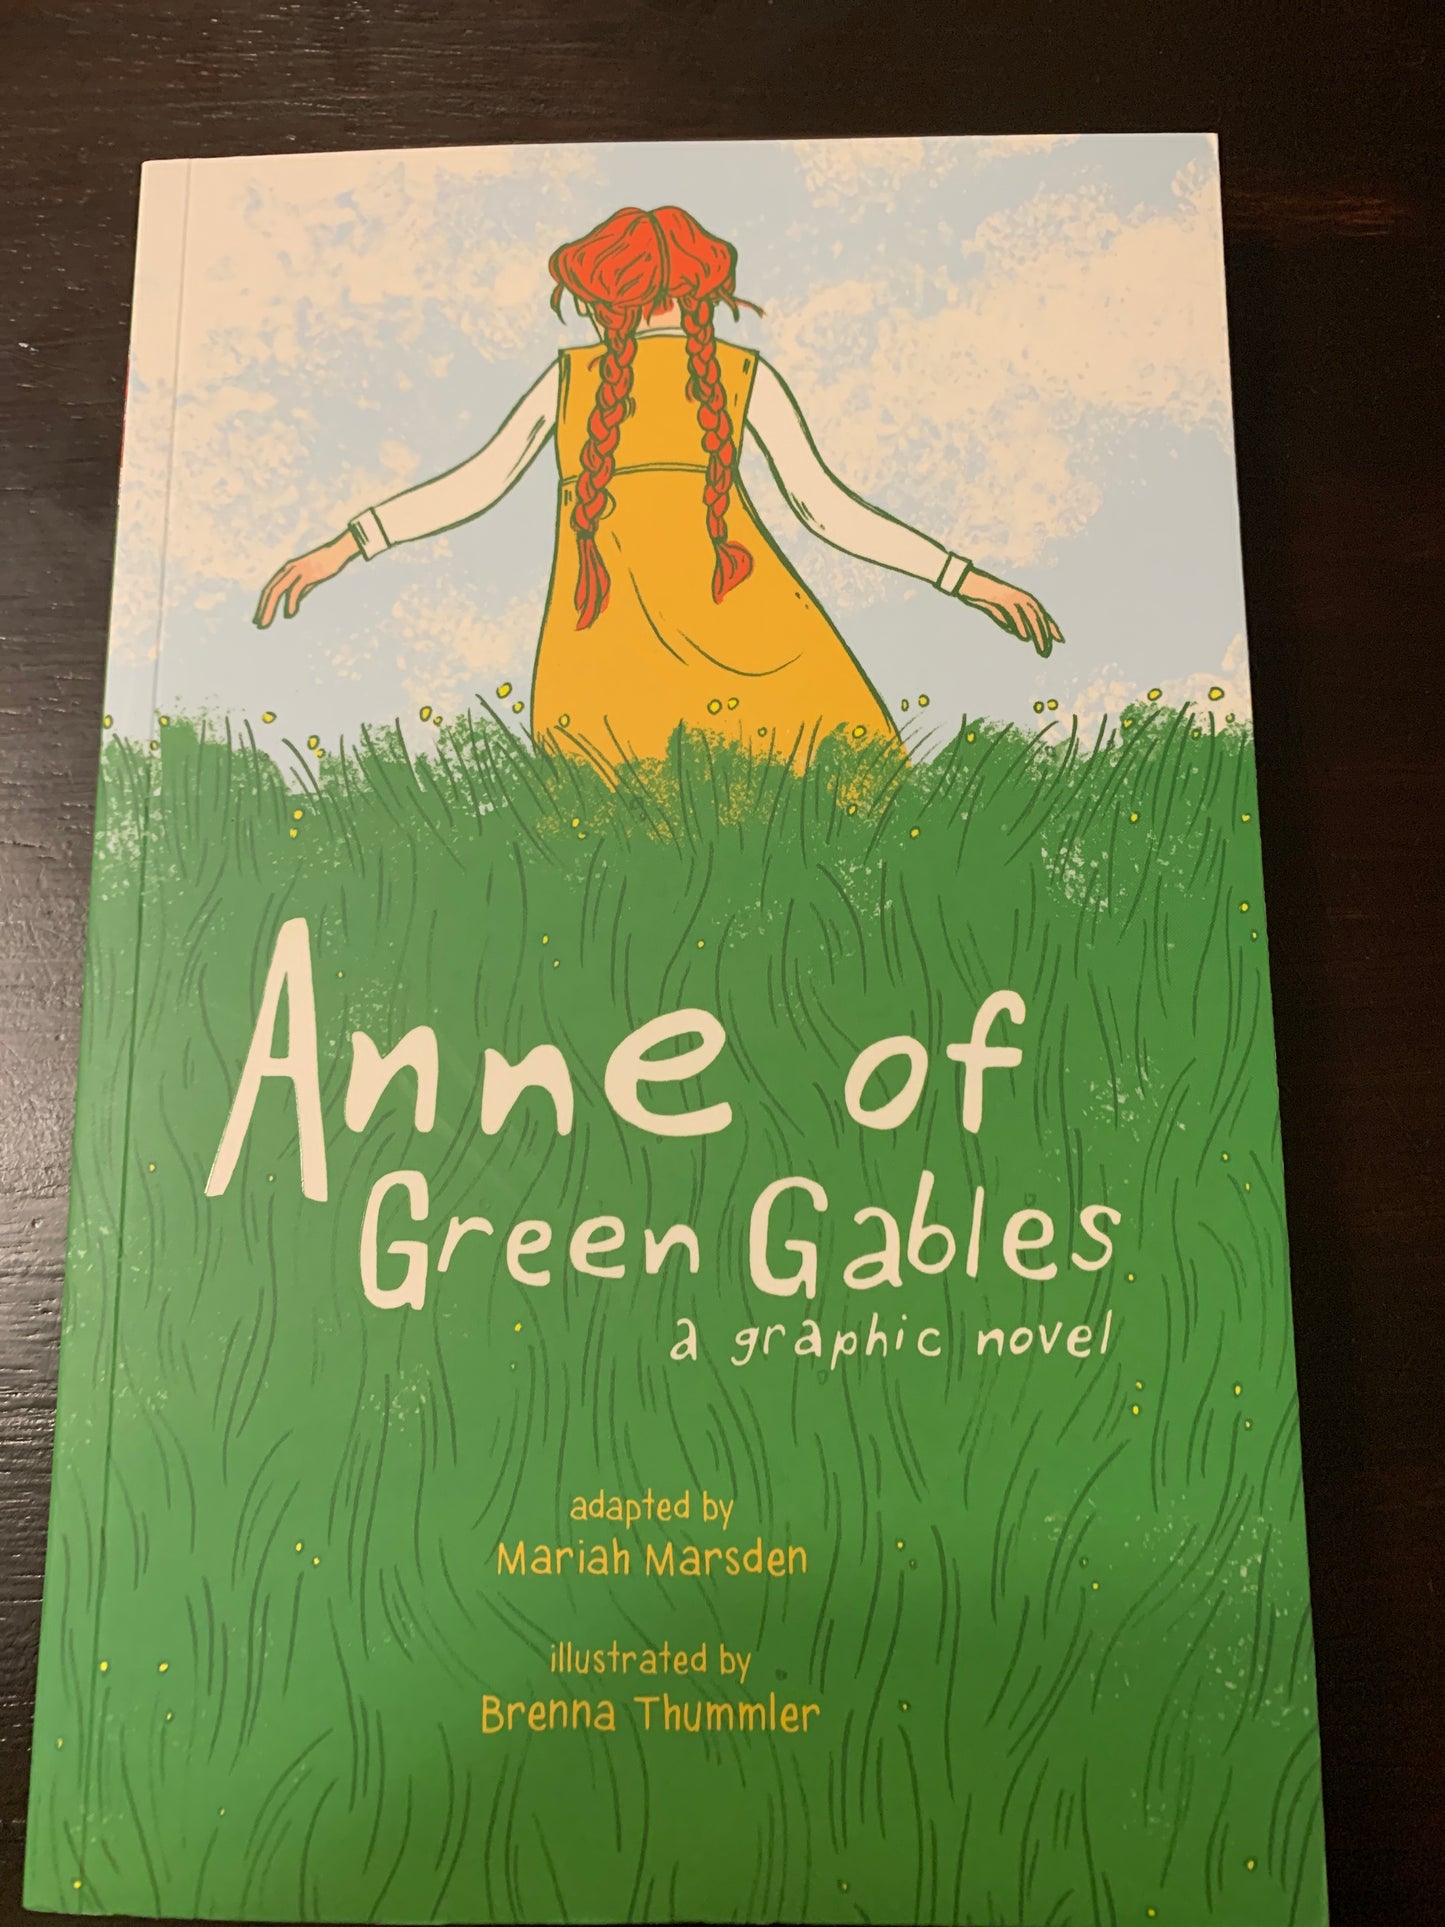 Anne of Green Gables: a graphic novel